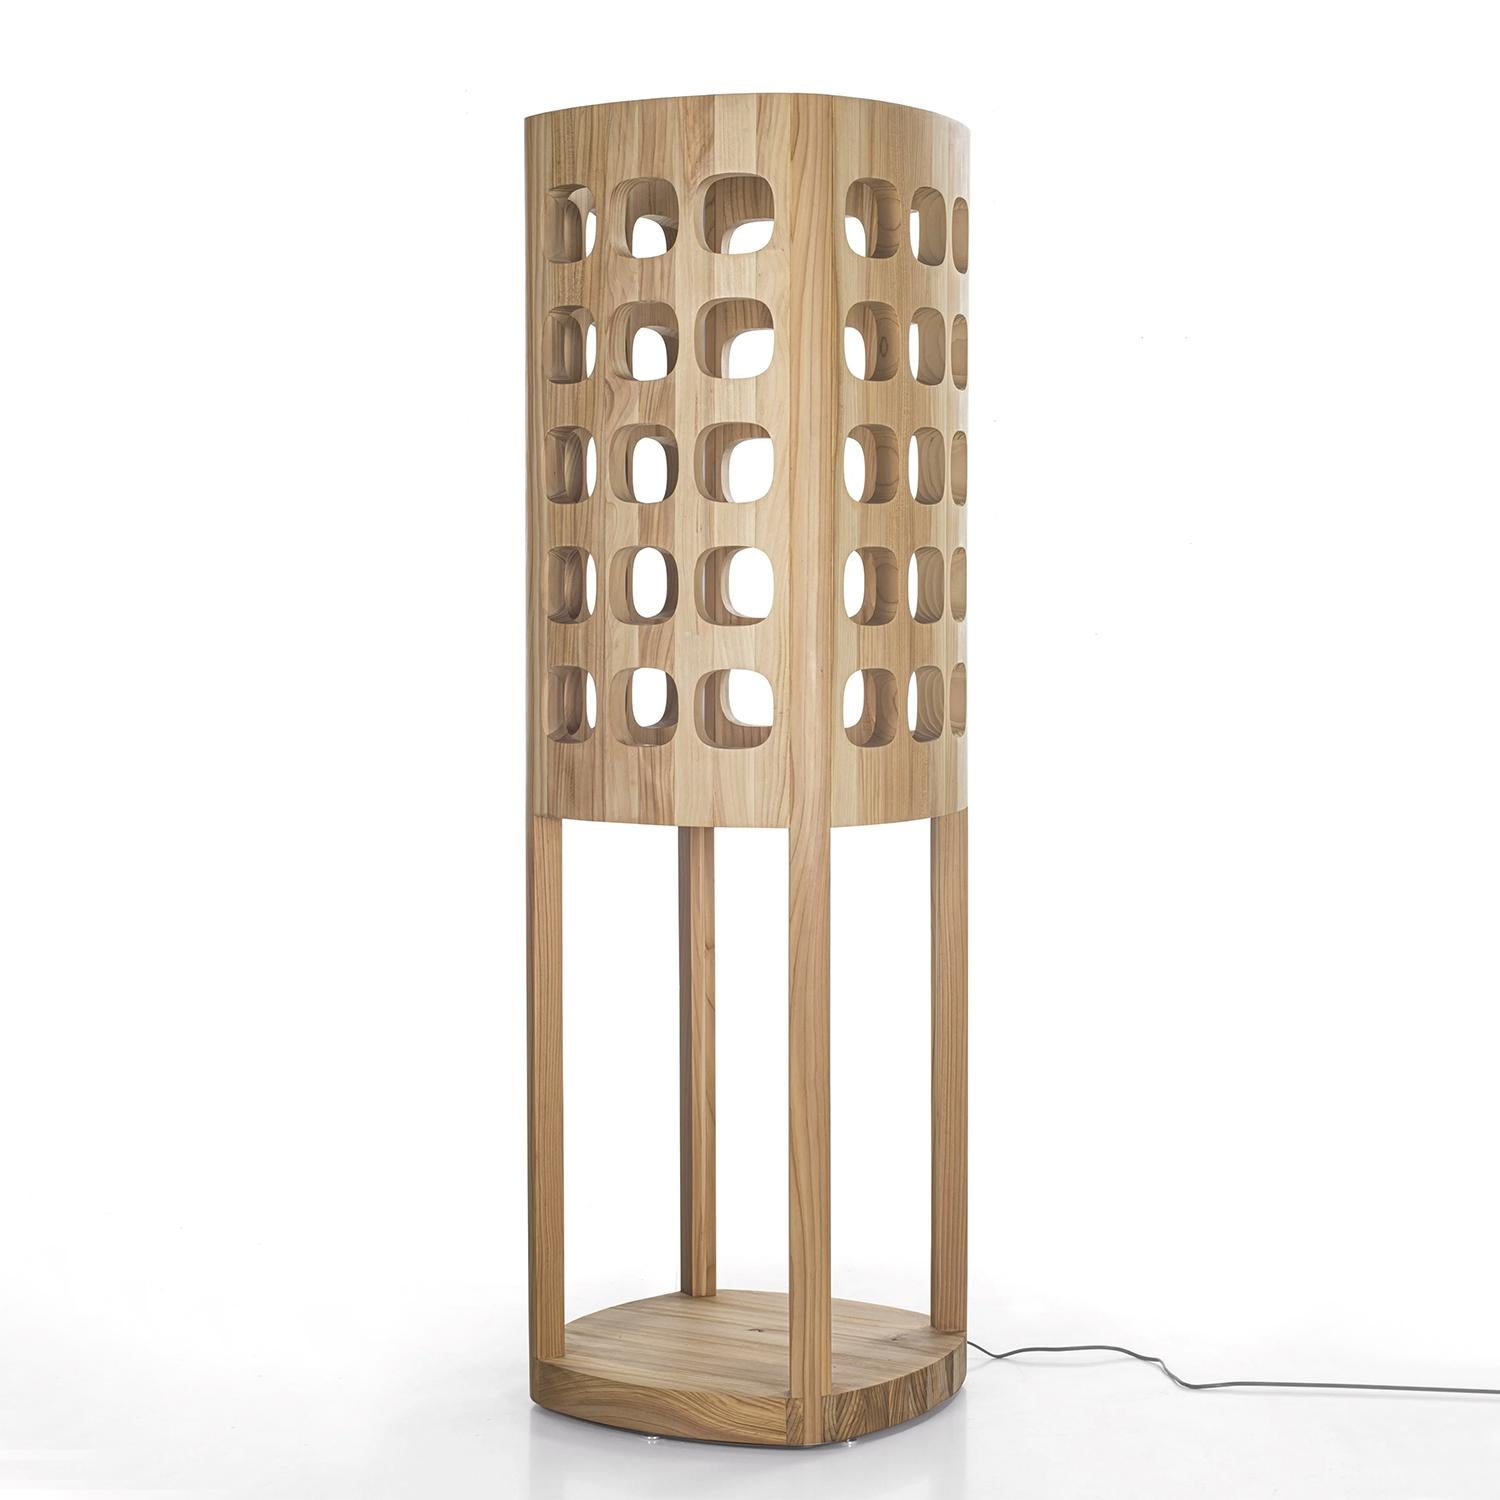 Floor Lamp Oaky Tour with all structure in solid oak
wood, wood treated with wax with natural pine extracts.
With led lights in strips, with remote controm included.
Also available on request in solid walnut wood or in solid
cedar wood.